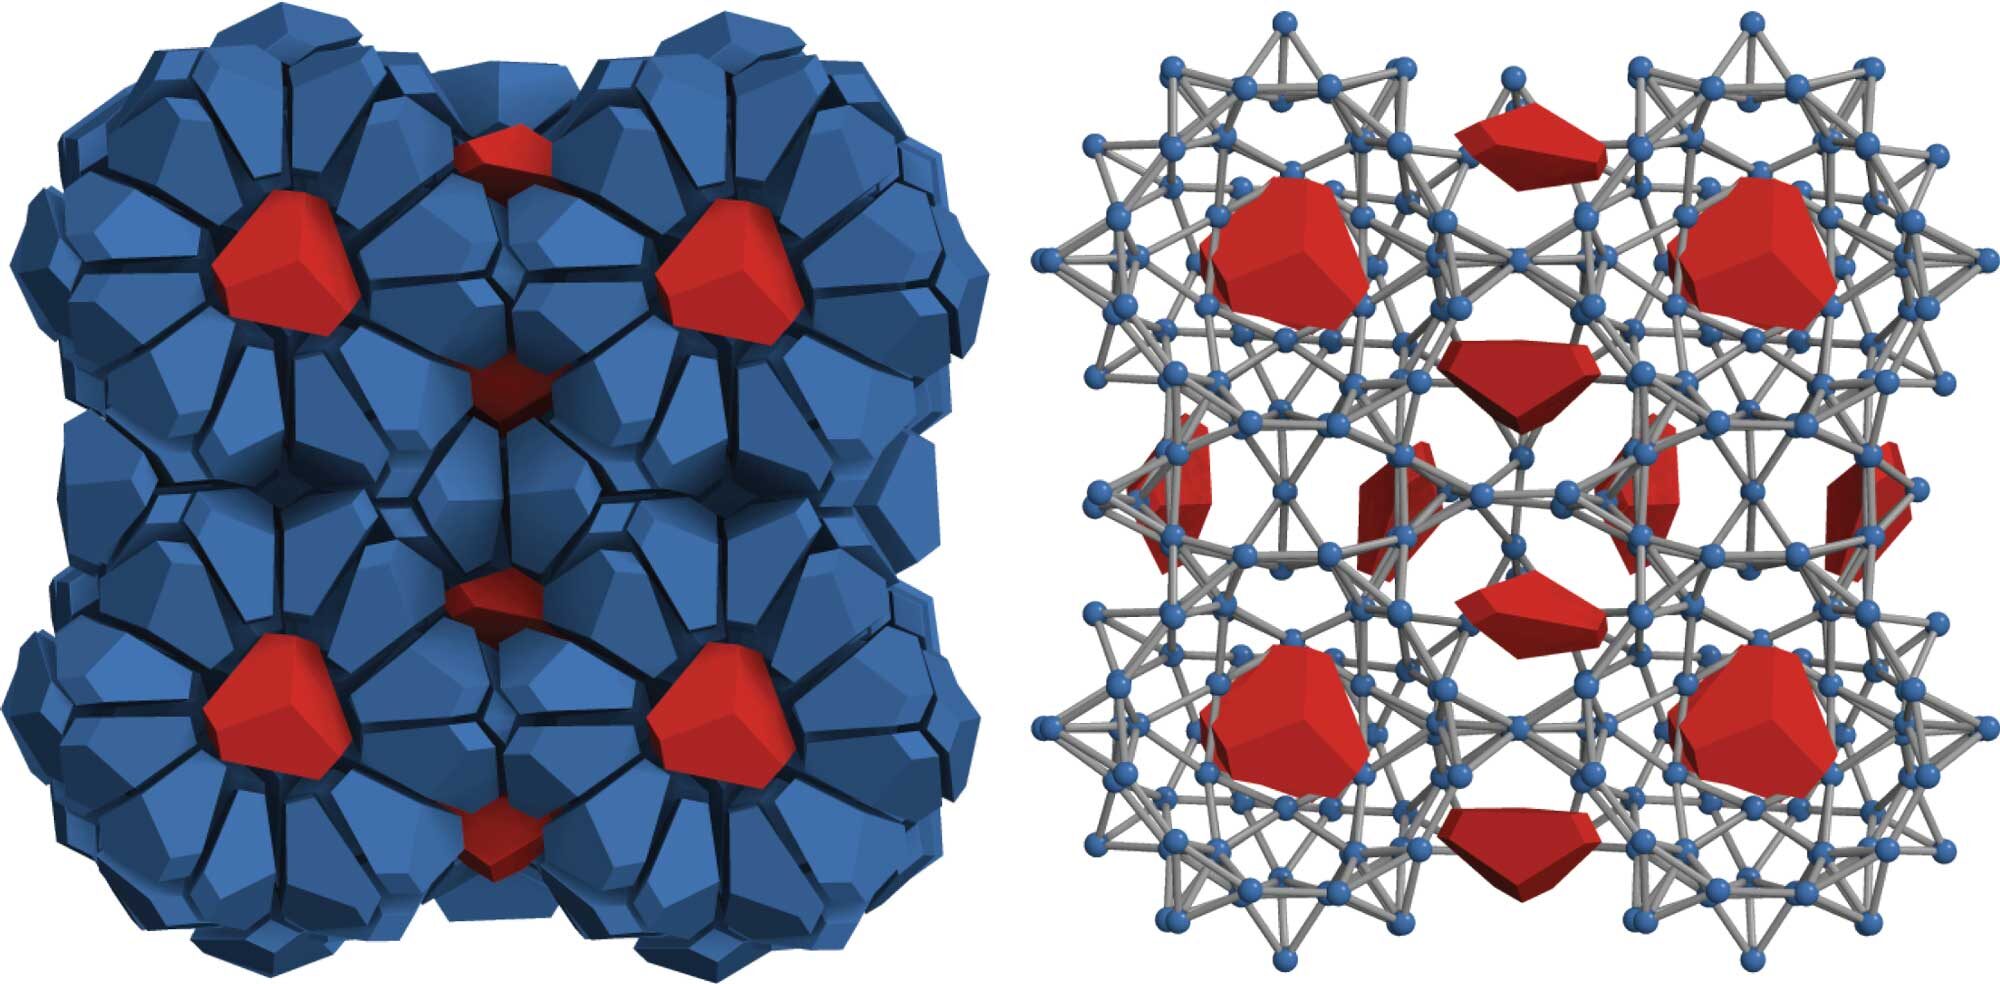 On the left, the blue bipyramid particles fan out around the red bipyramid particles, looking vaguely like blue petaled daisies with red centers looking out of the page. In the layer of the structure shown with the cages on the right, red guest bipyramids can be seen nestled between, as well as inside, the spheroidal blue-and-gray cages.